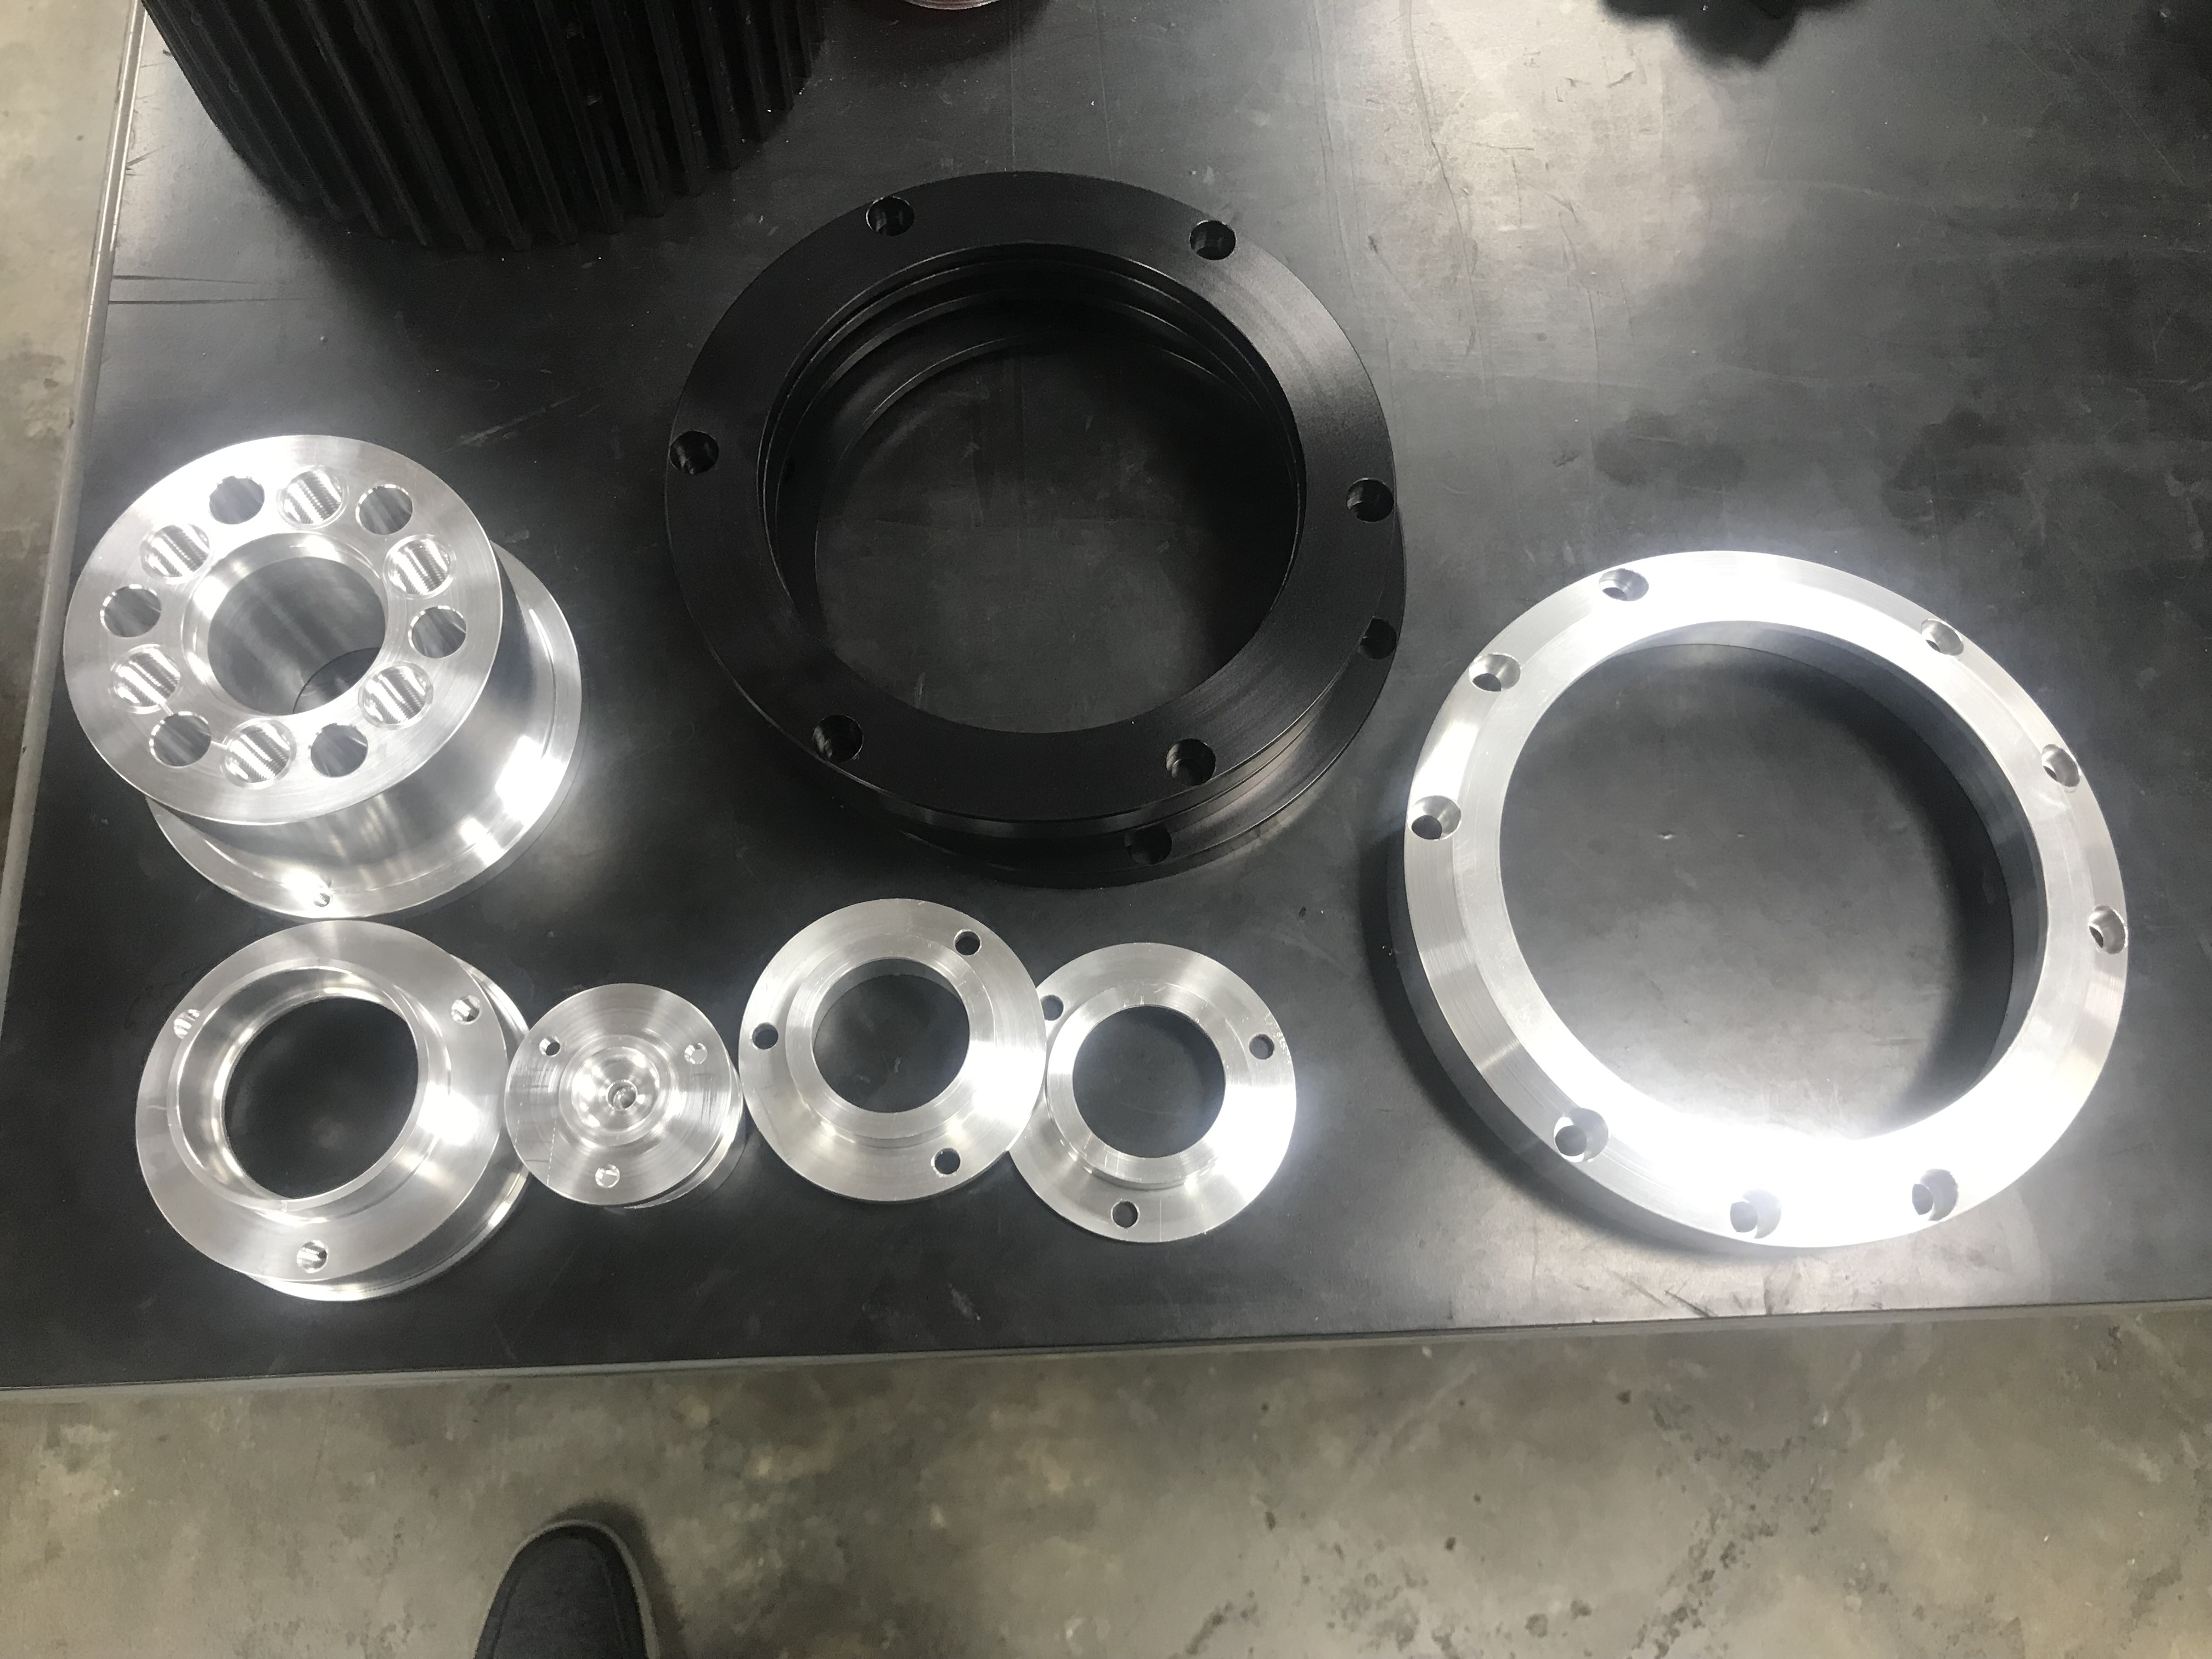 Top Fuel Motorcycle Hard Coated Parts